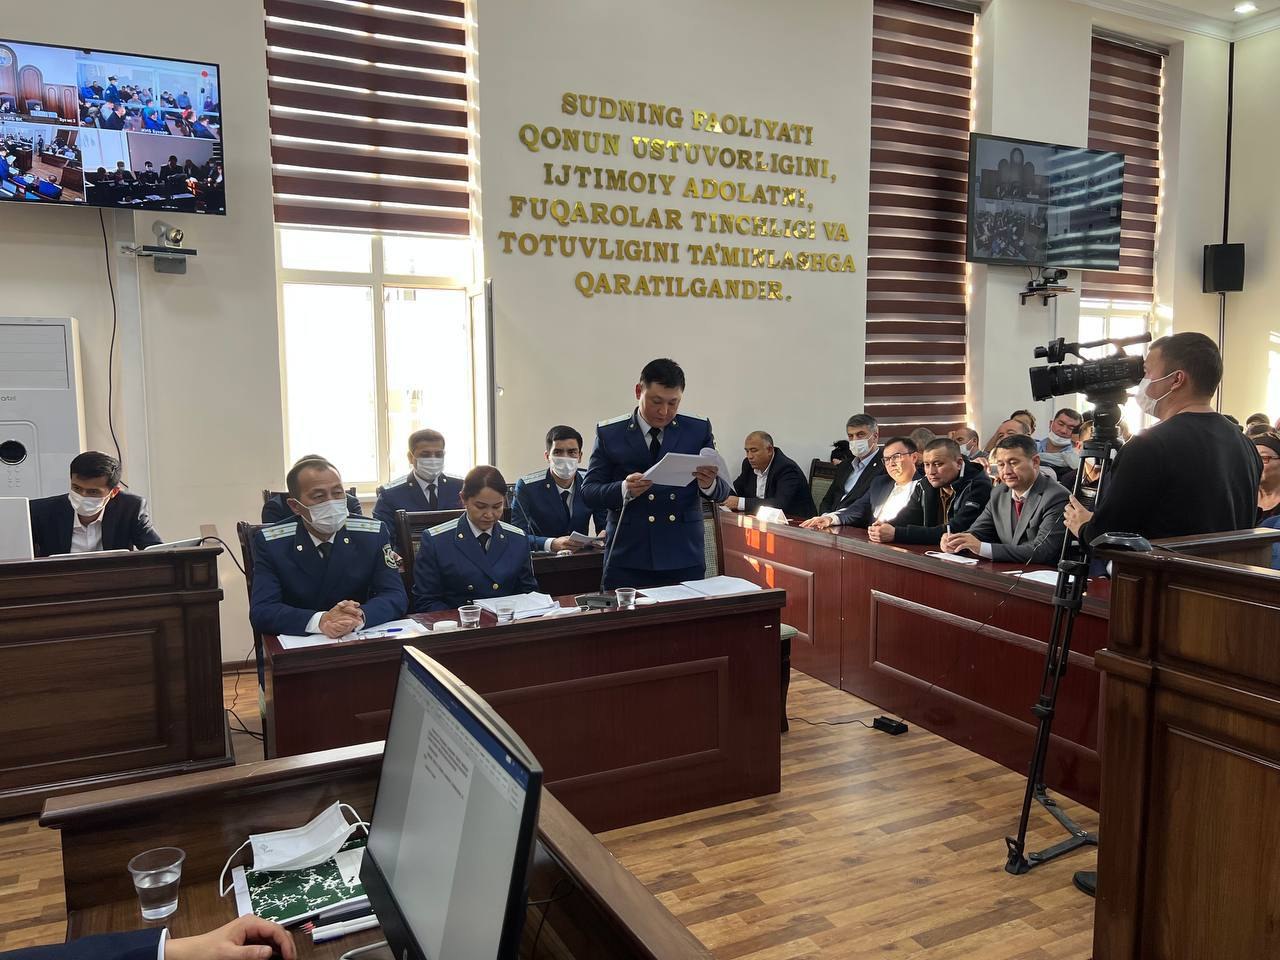 Commission members participate in all lawsuits related to riots in Karakalpakstan